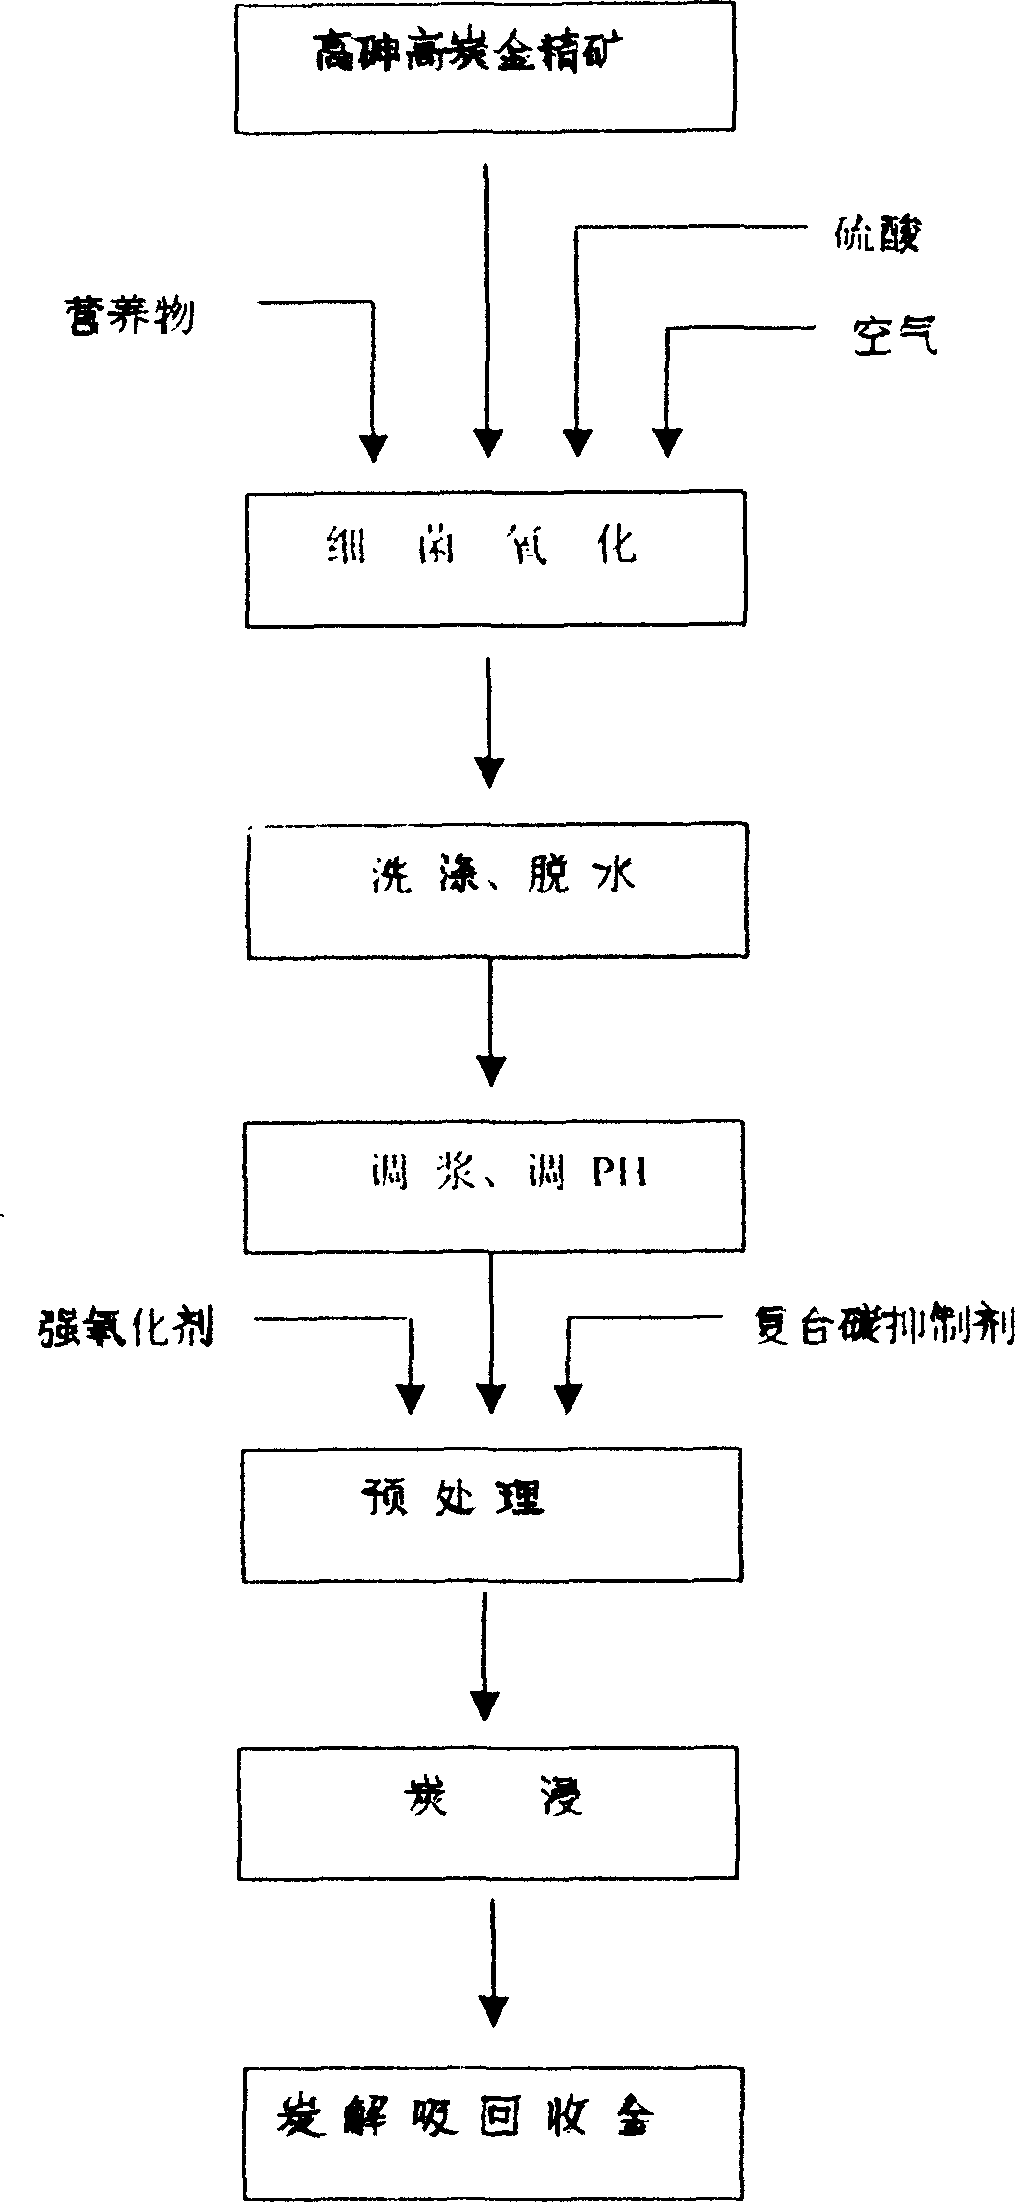 Process for treating high arsenic high carbon gold mine